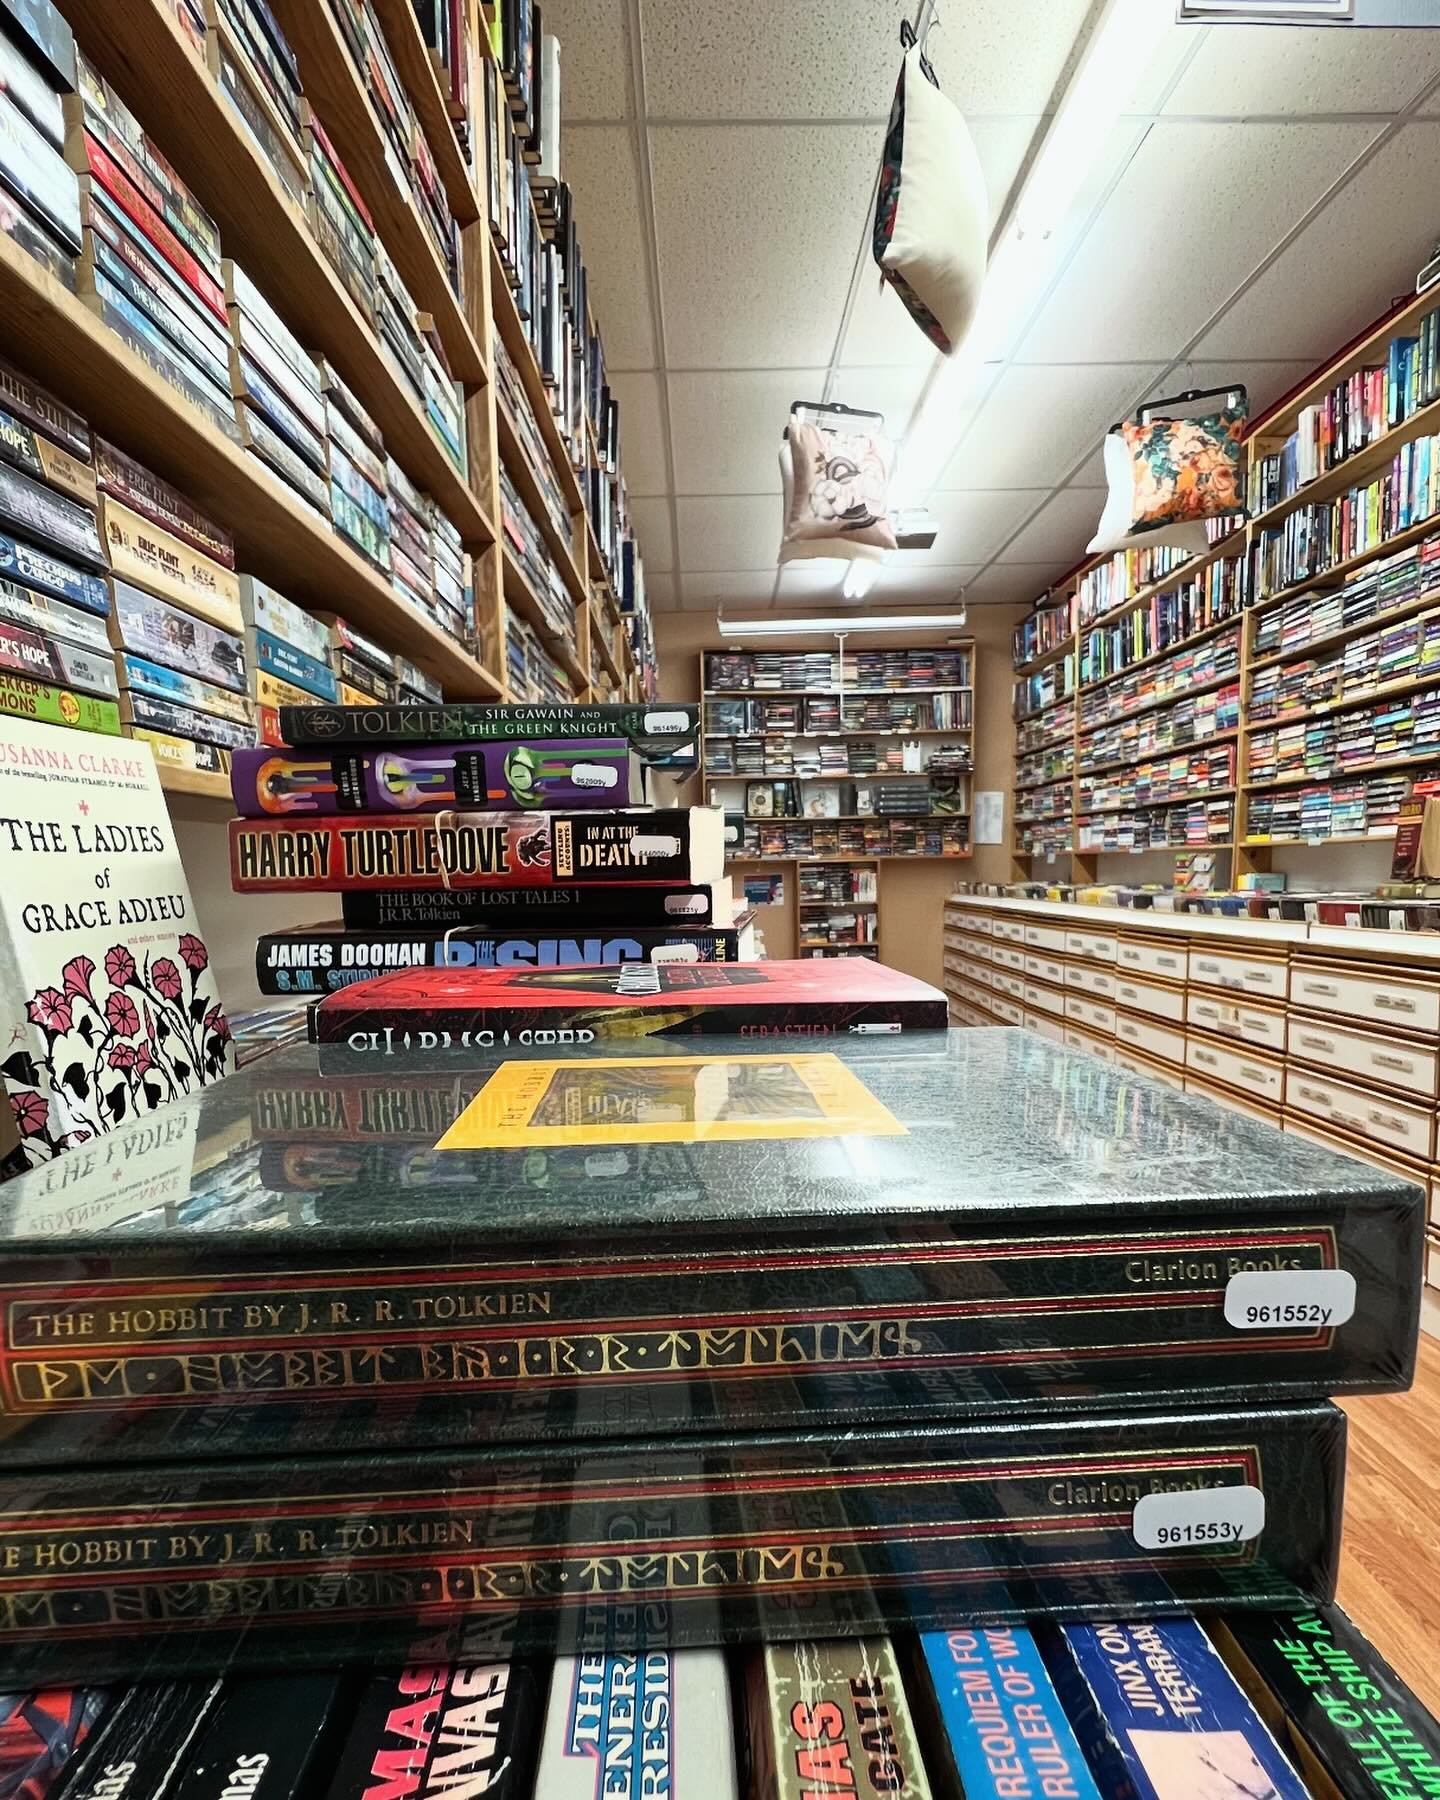 It&rsquo;s our favorite book store to visit and for good reason!
We always love popping into book stores wherever we go but none of them compare to the gem we have right here in town!
The @zebookman has something for everyone! If you can&rsquo;t find